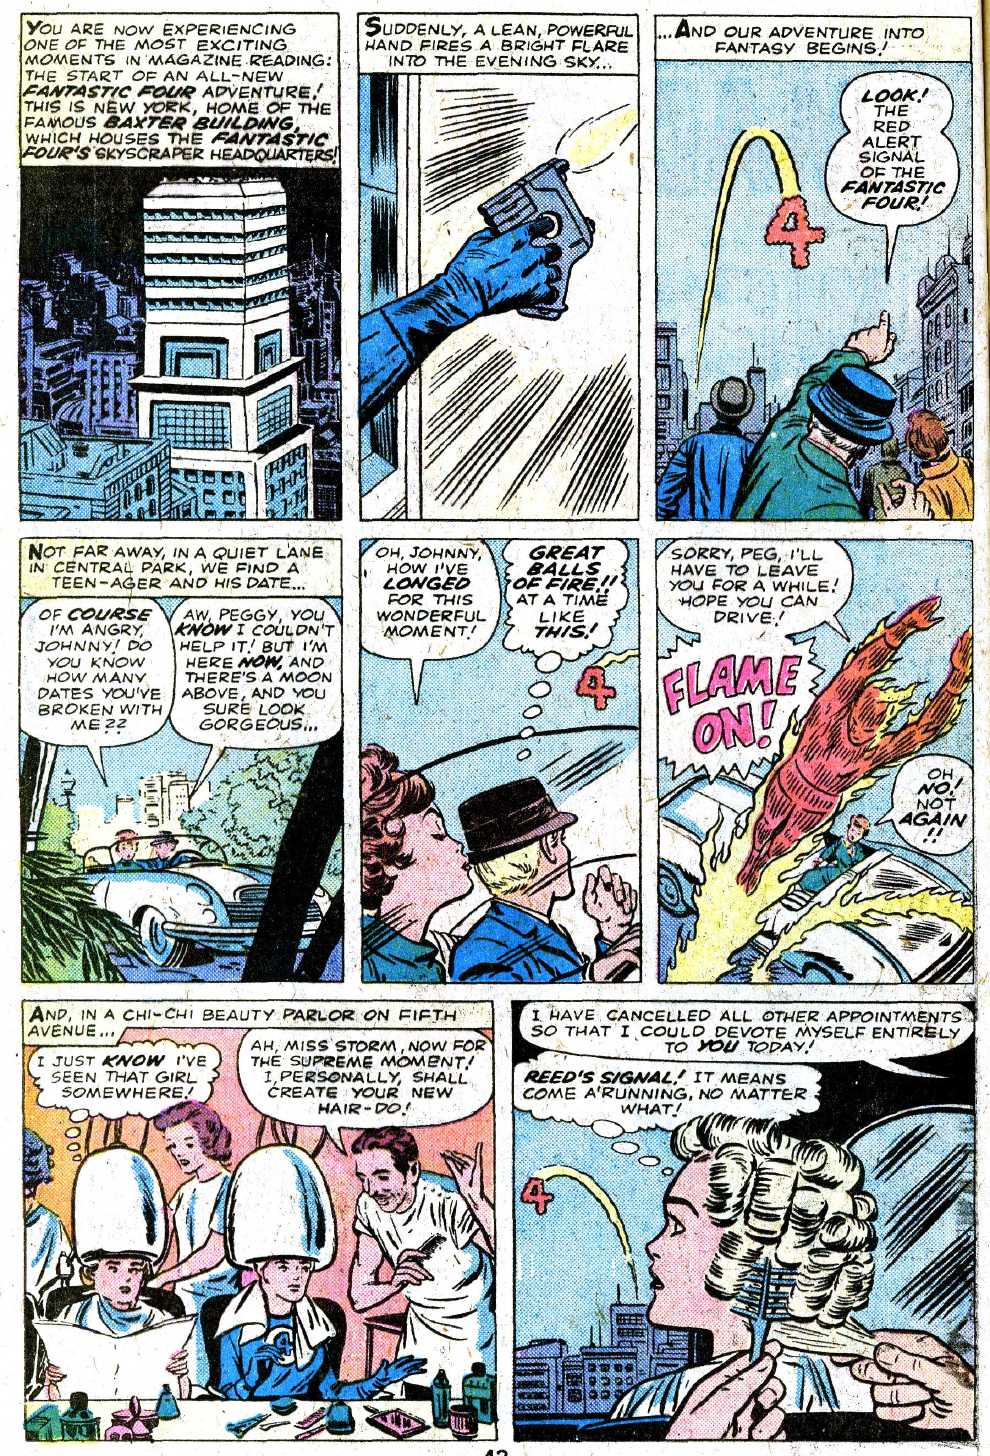 Read online Giant-Size Fantastic Four comic -  Issue #5 - 44